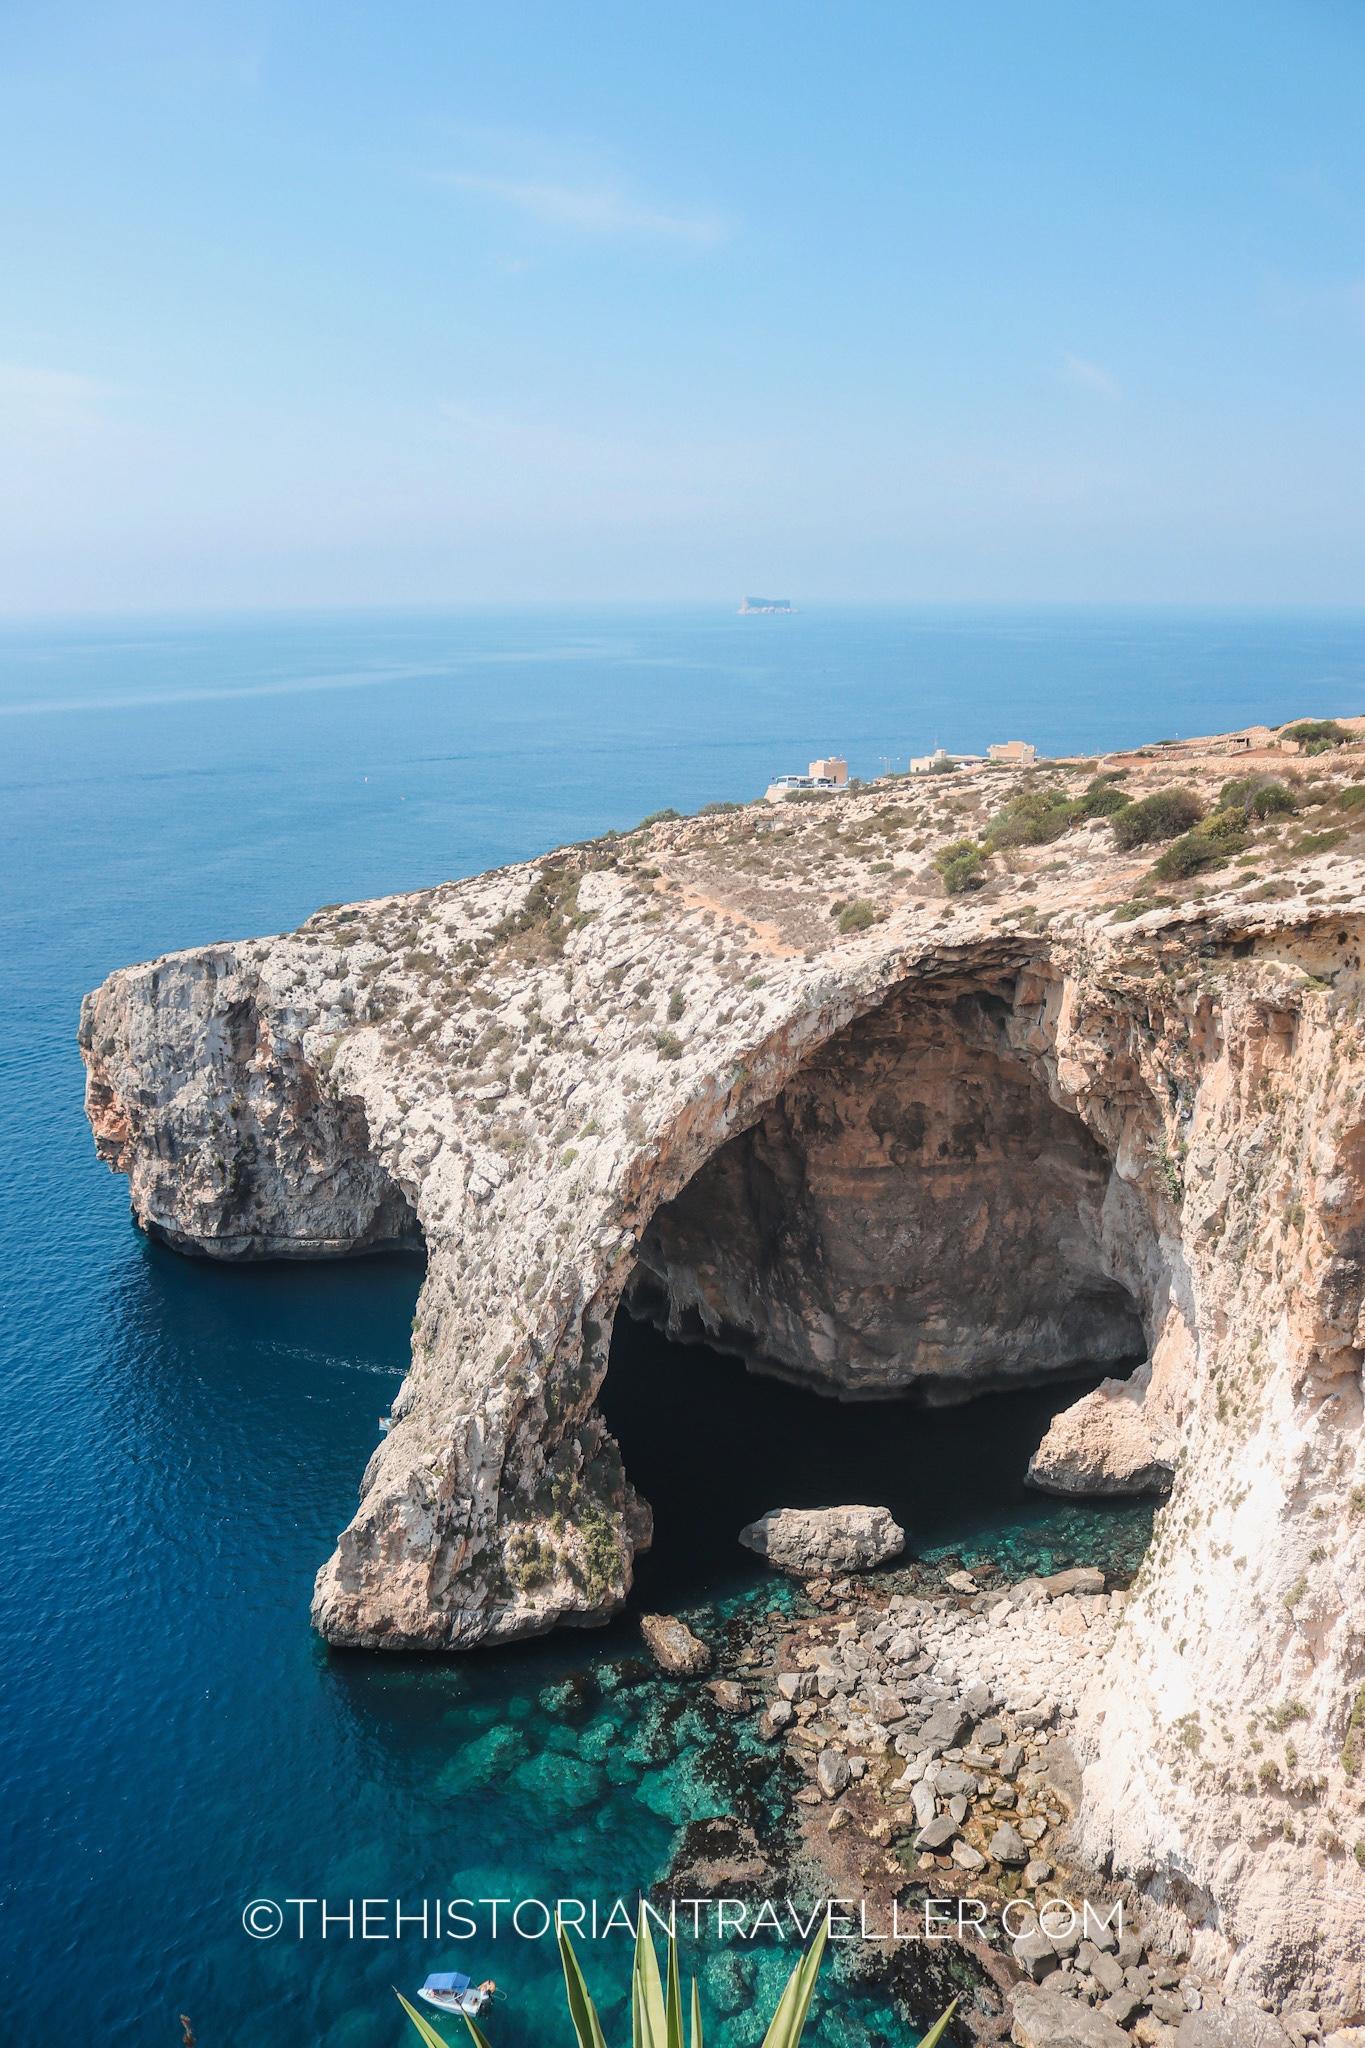 Blue Grotto from the view point